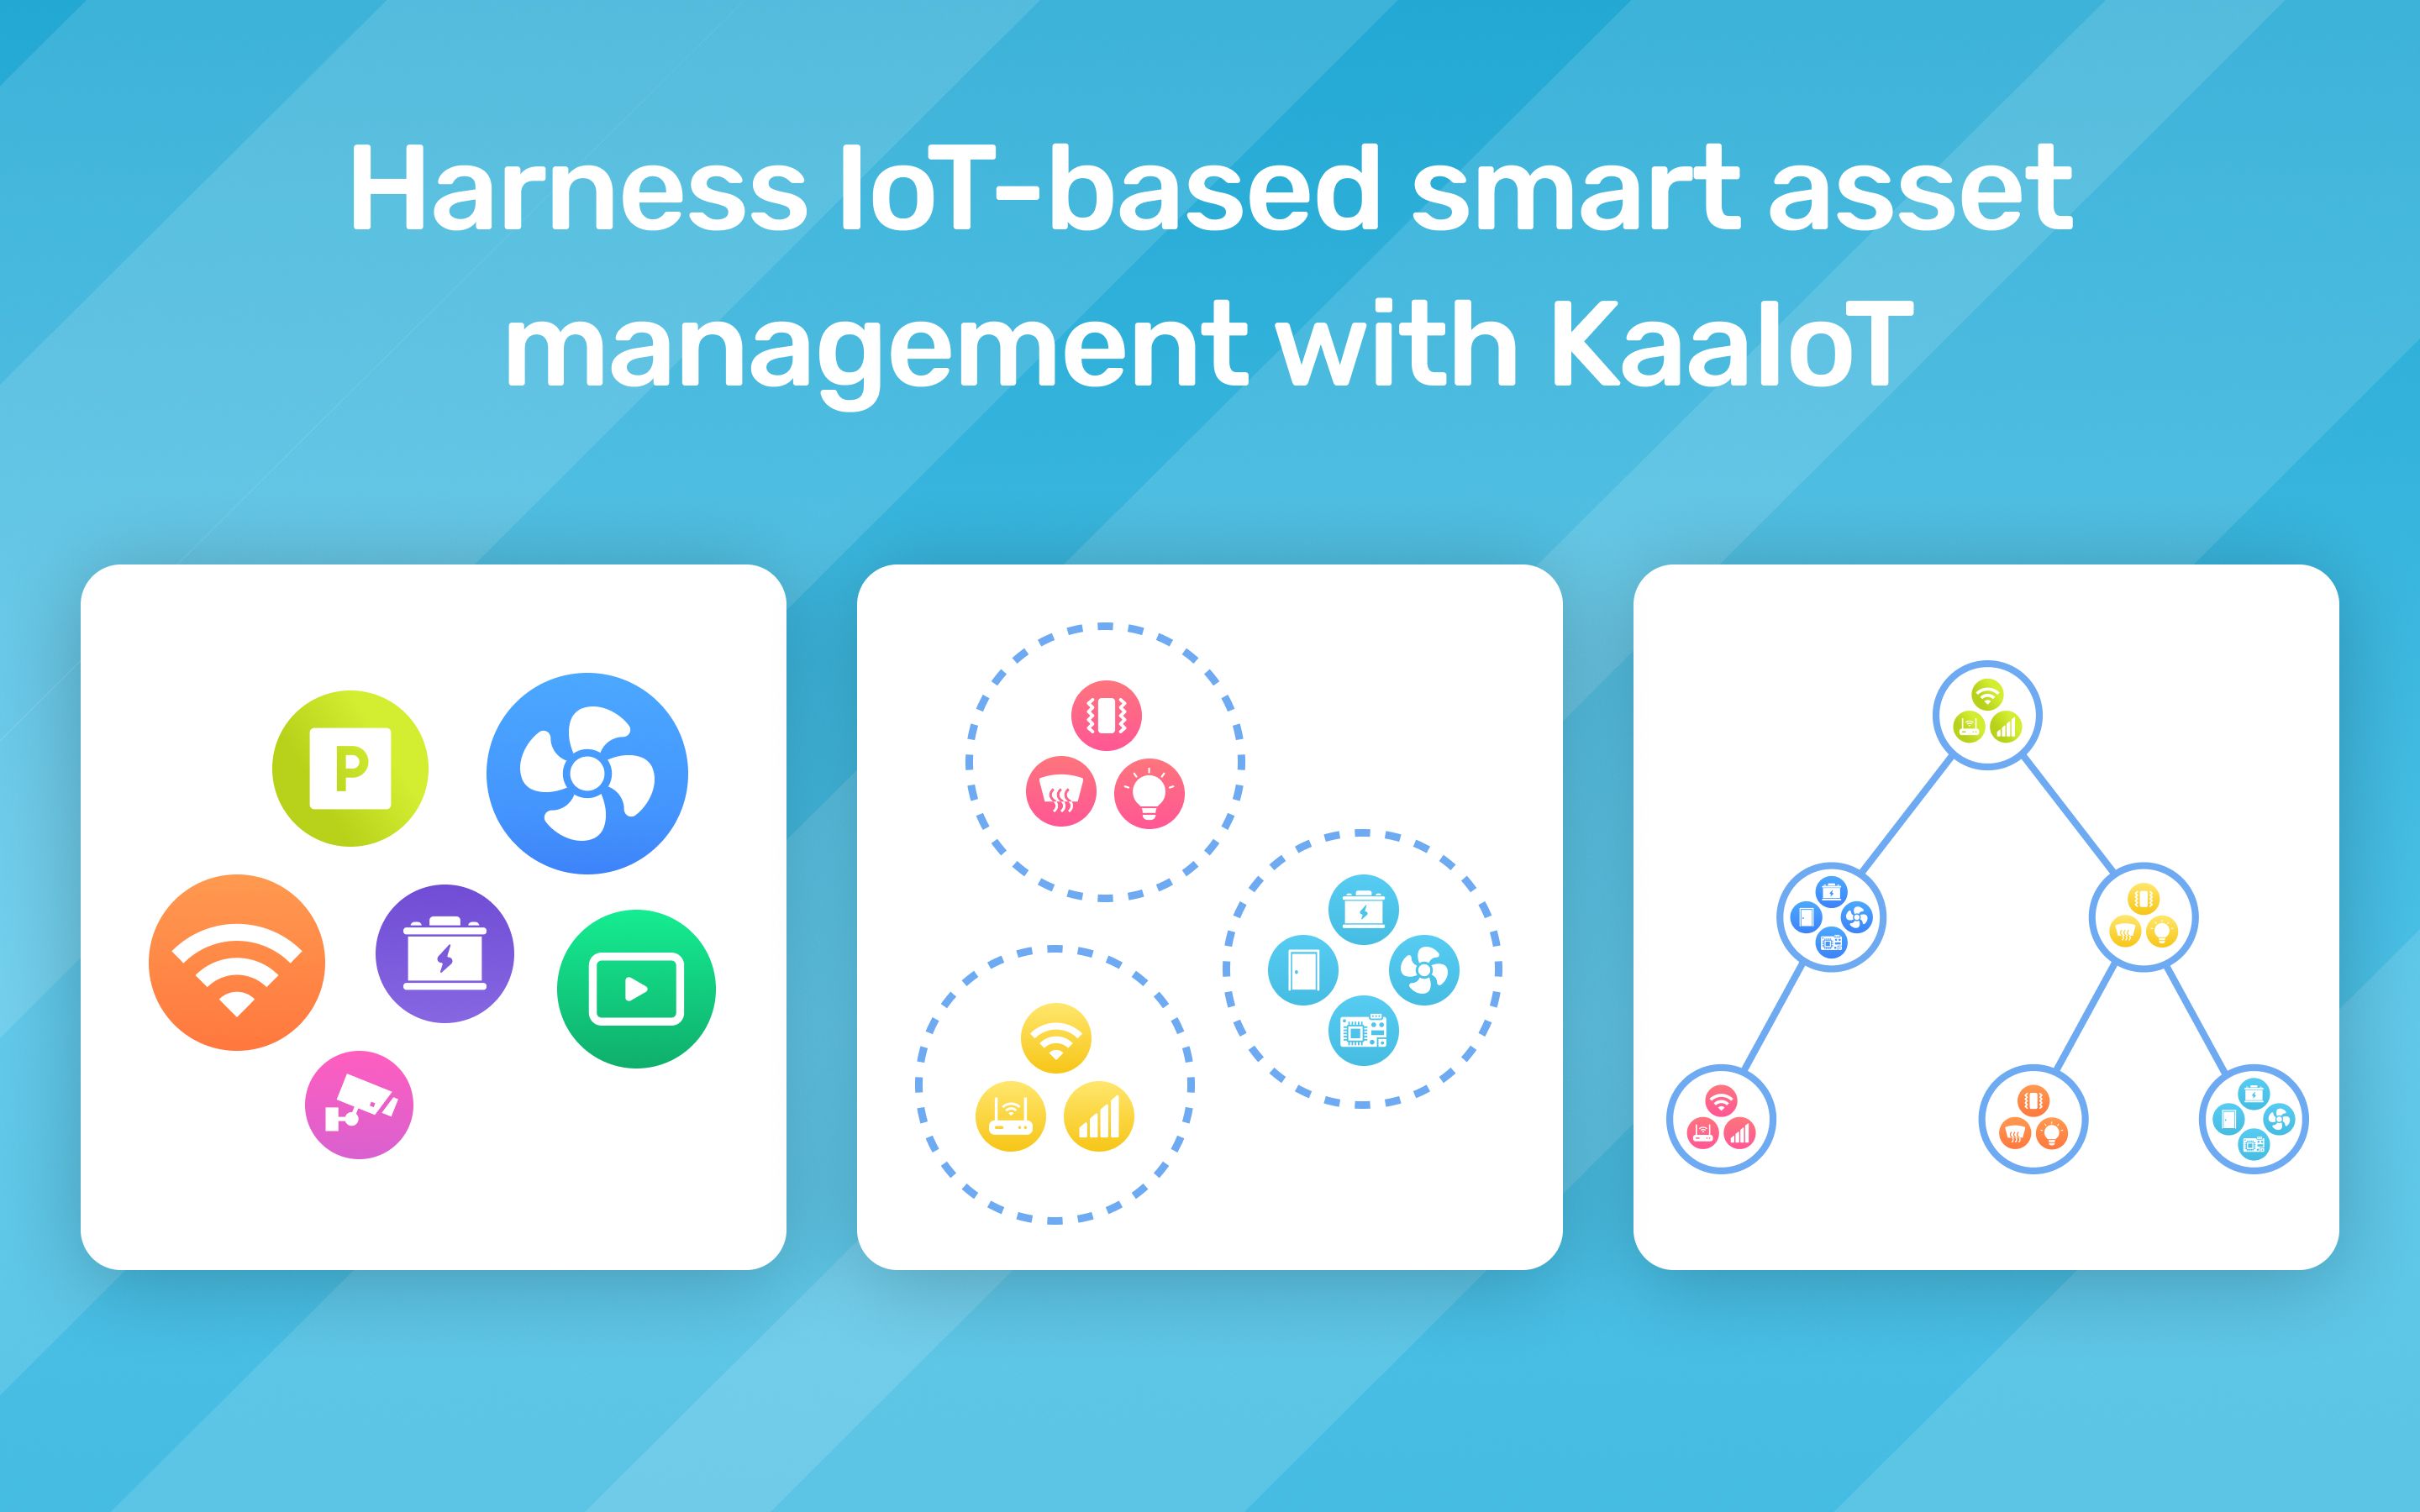 Harness IoT-based smart asset management with KaaIoT